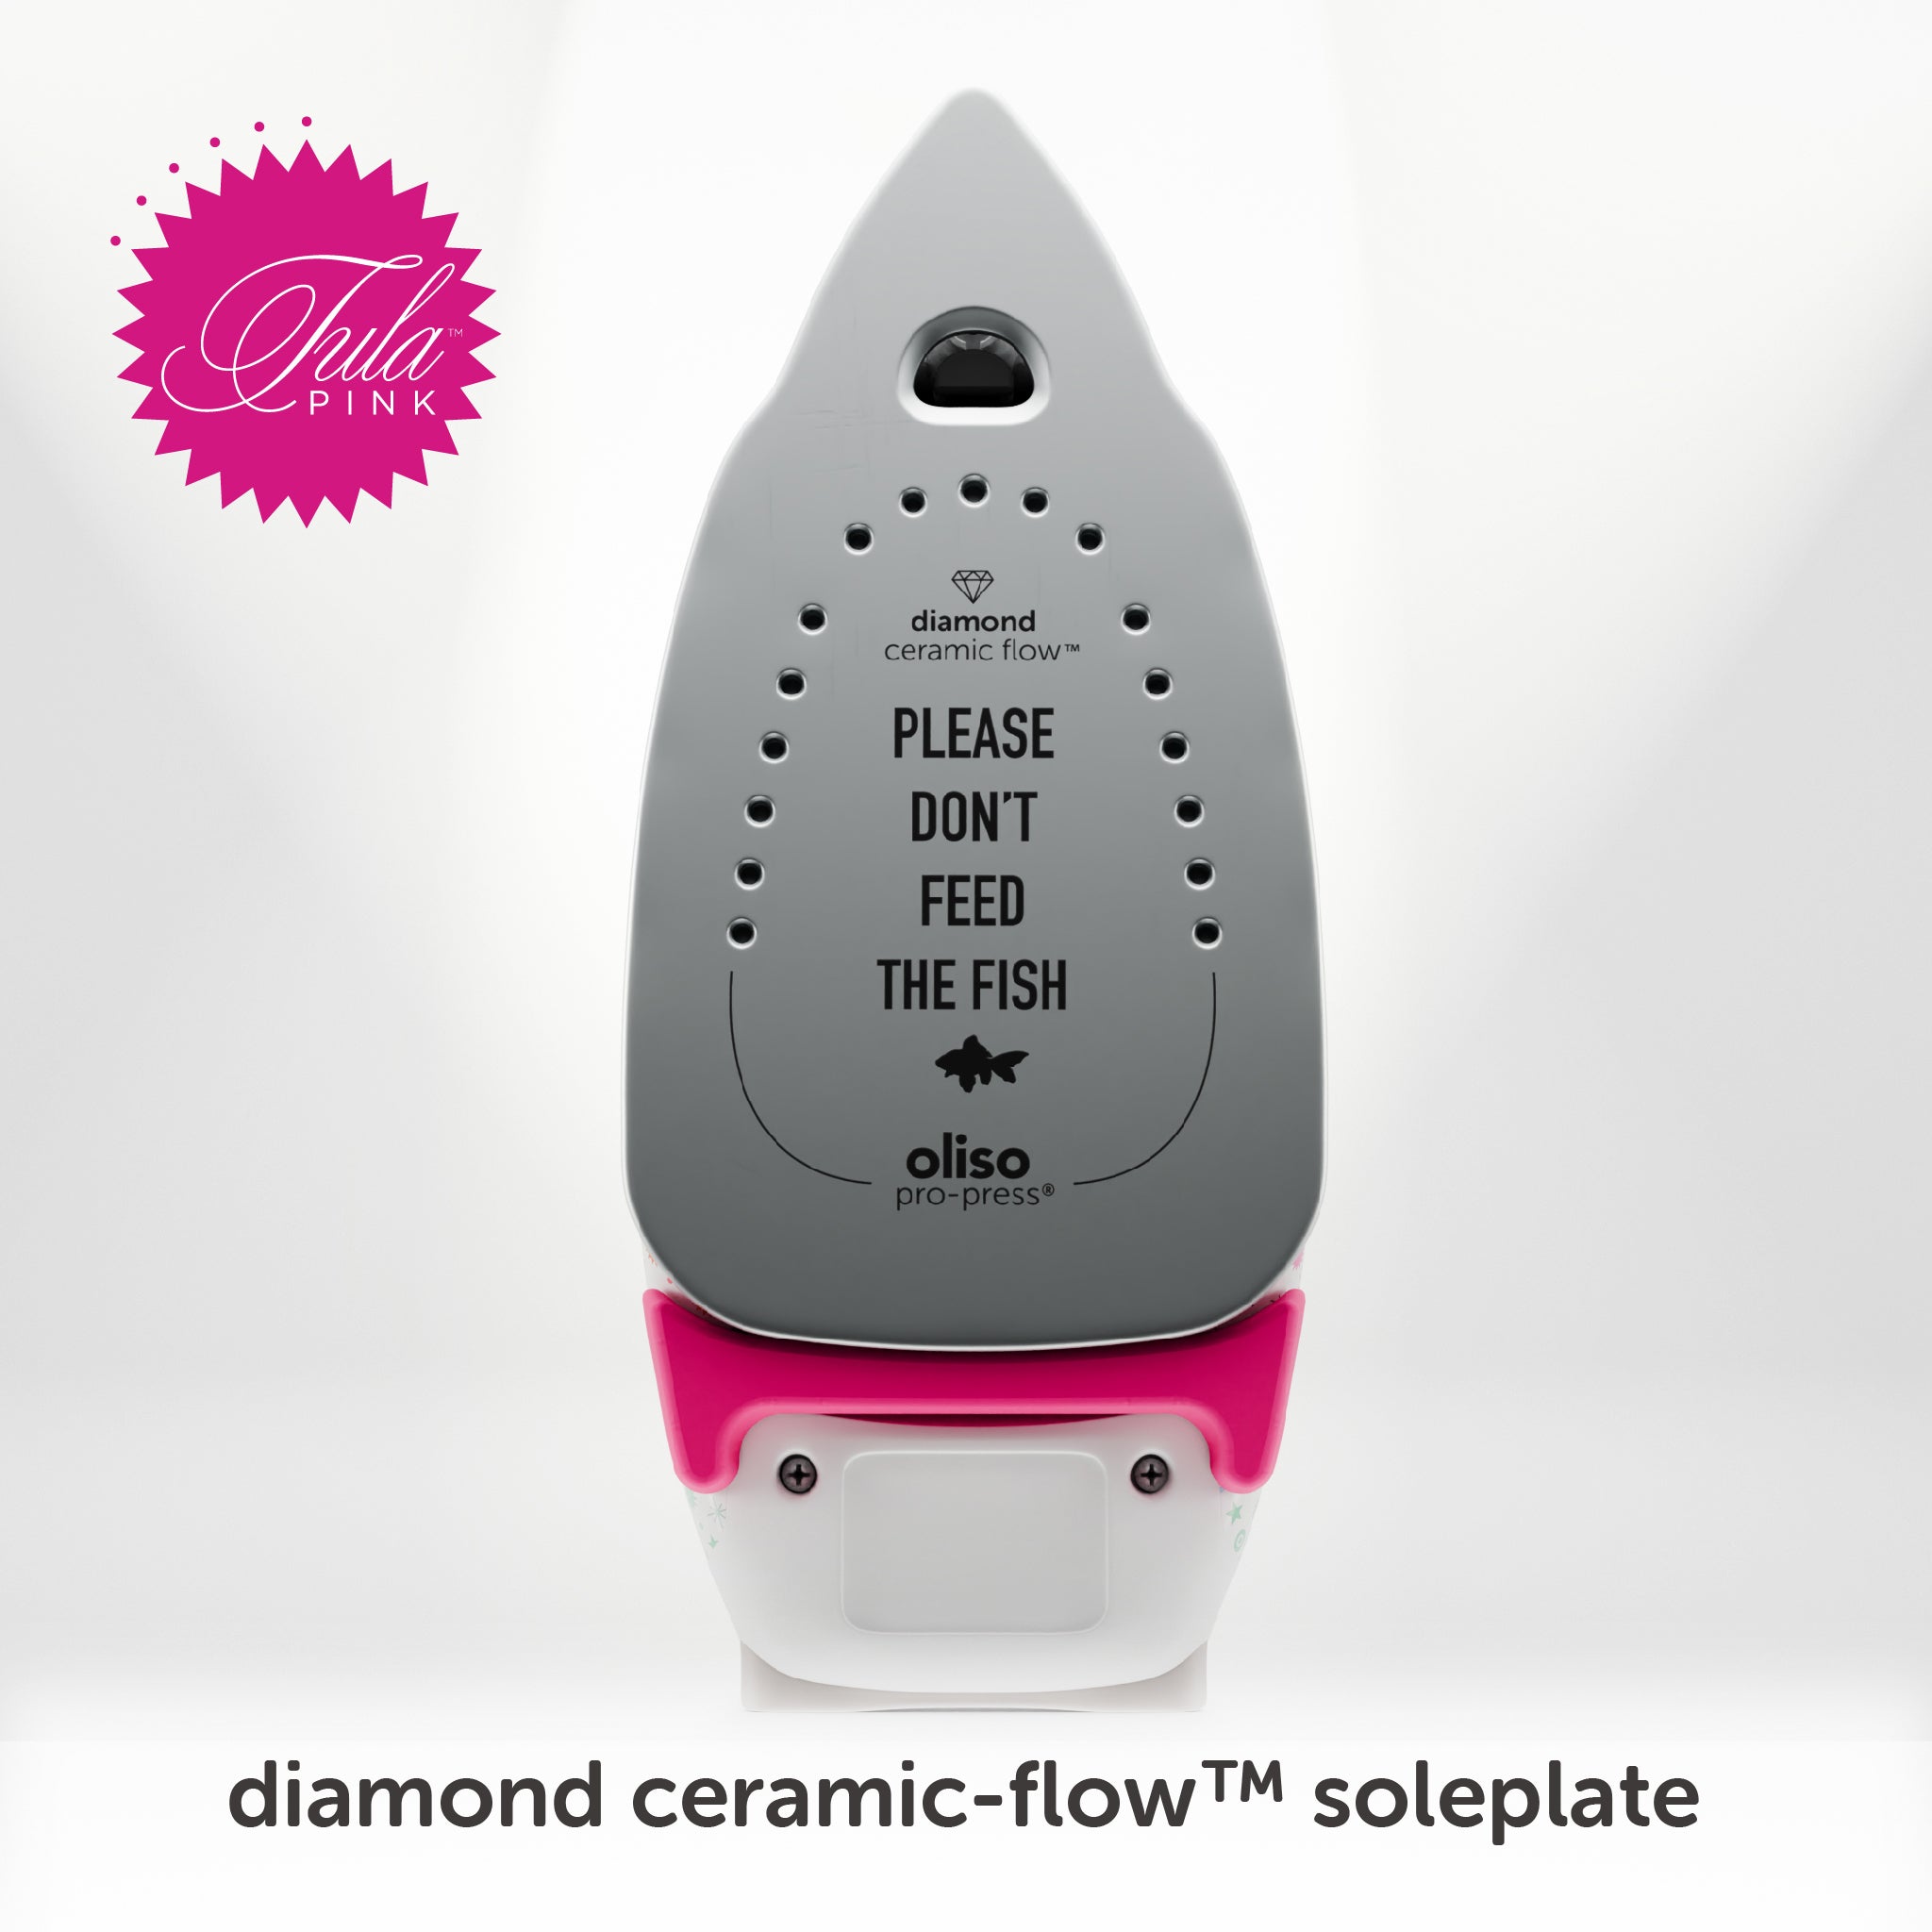 ProPlus smooth ceramic soleplate for superb pressing. With a reminder not to feed the fish.